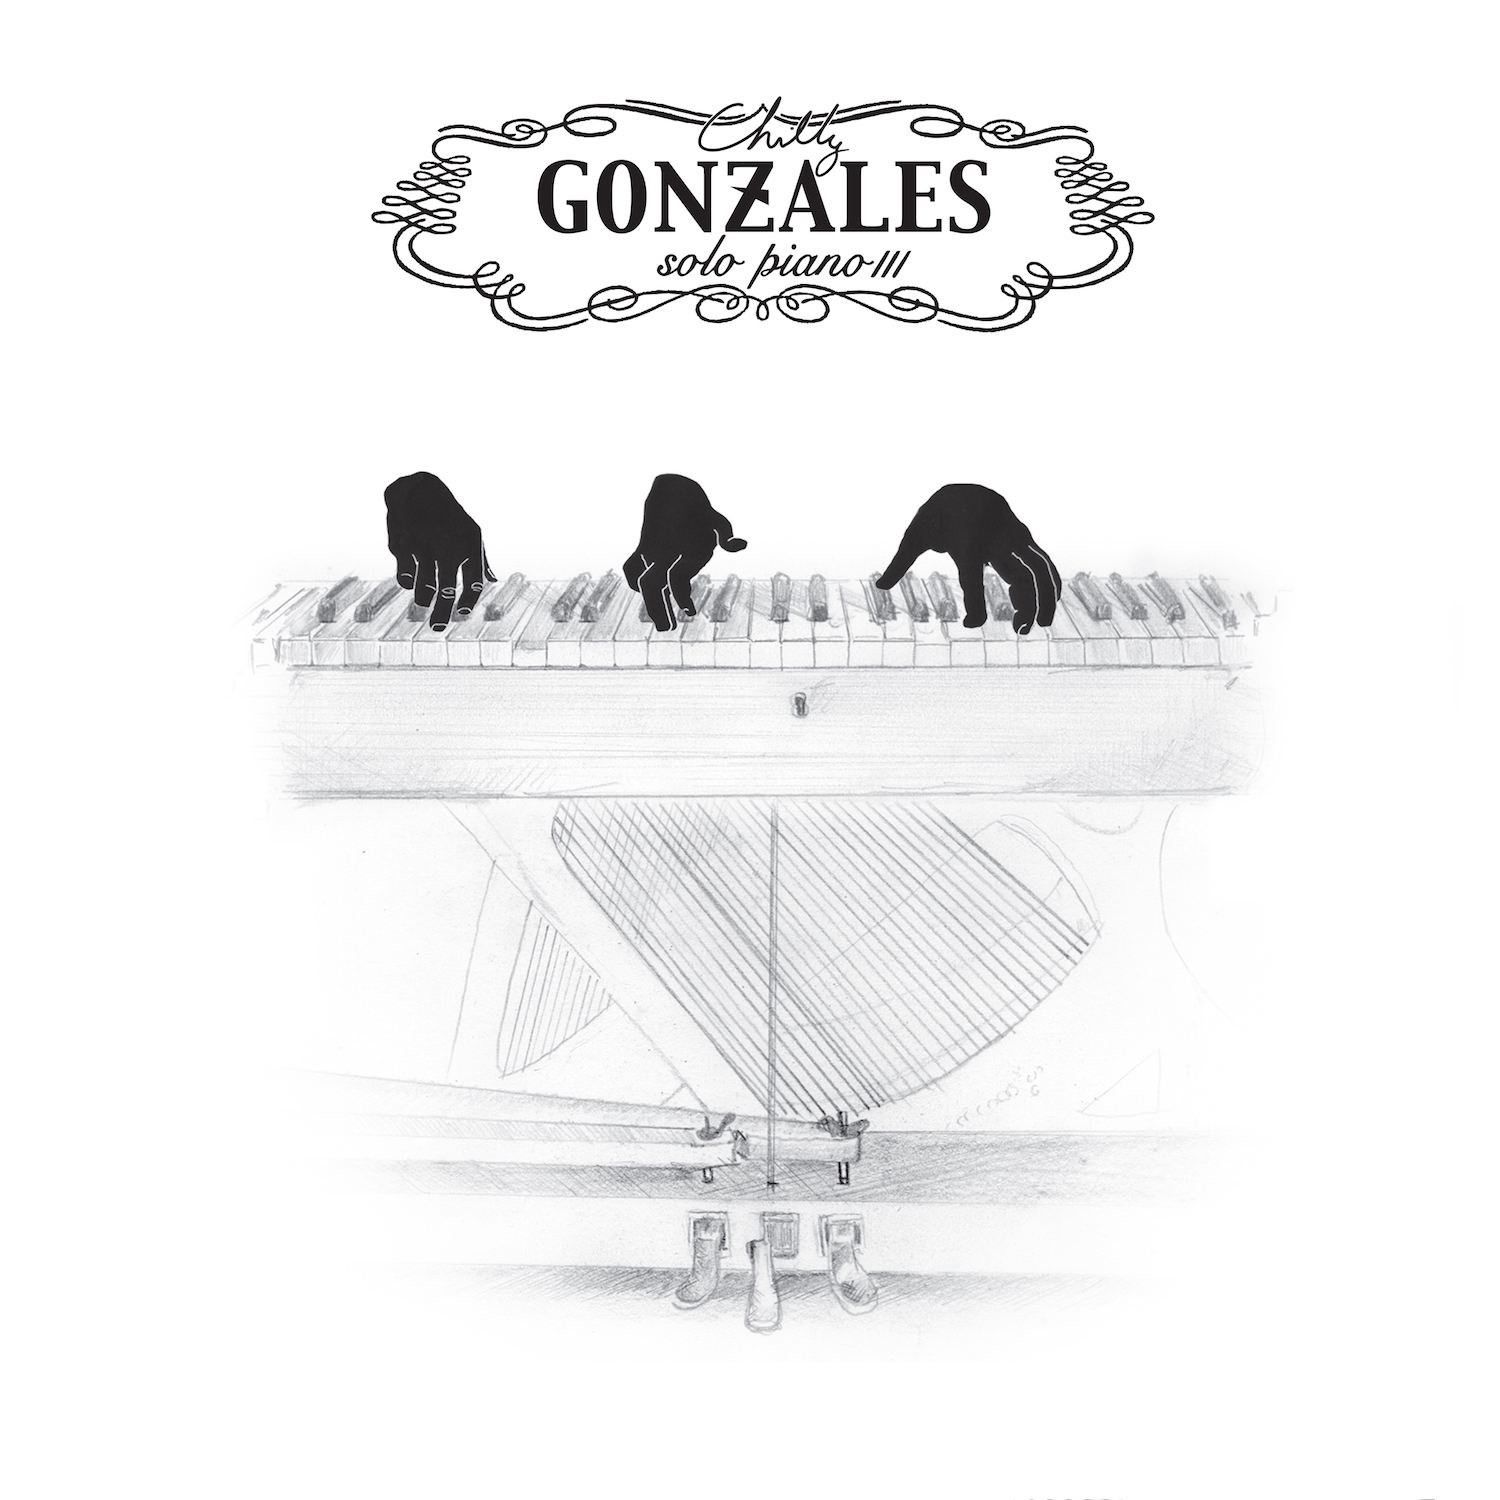 Chilly Gonzales solo piano III